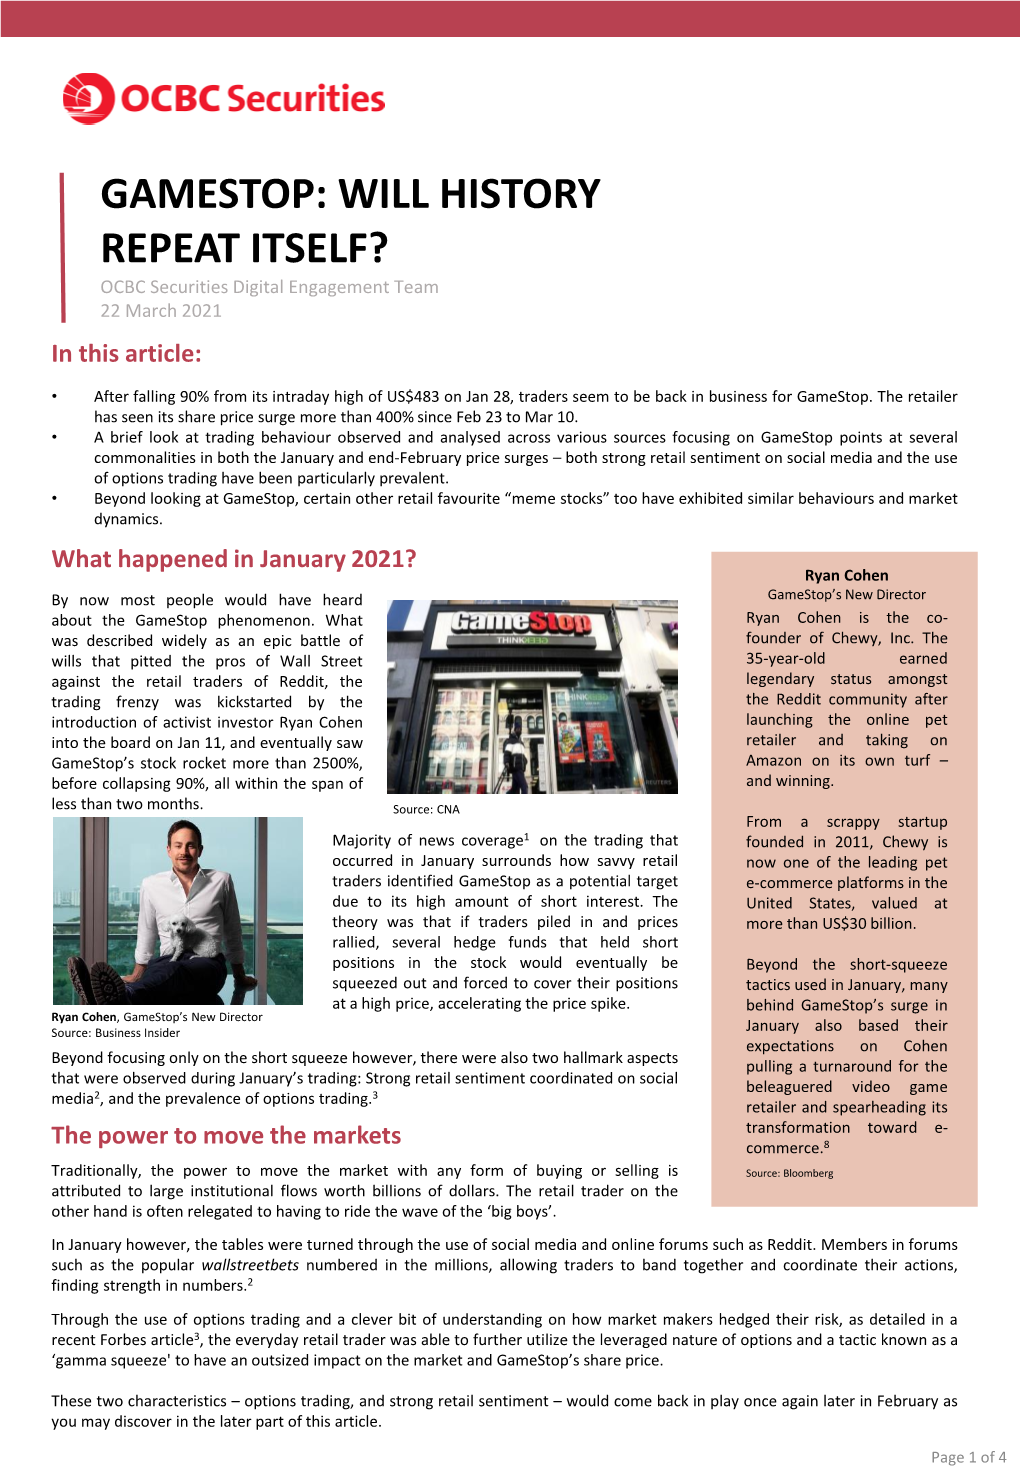 GAMESTOP: WILL HISTORY REPEAT ITSELF? OCBC Securities Digital Engagement Team 22 March 2021 in This Article